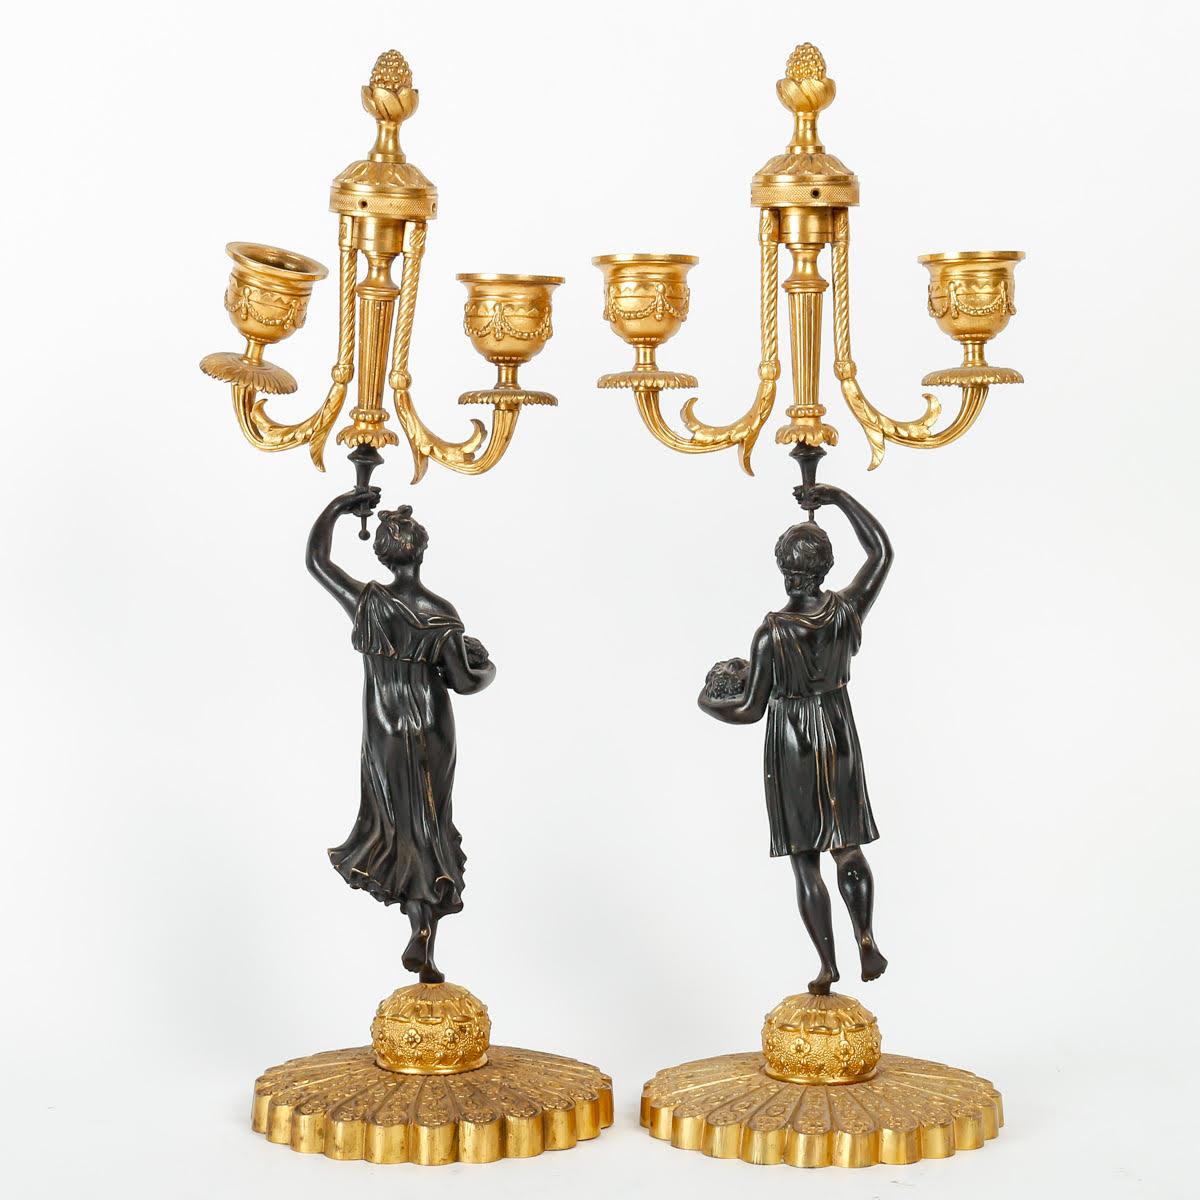  Pair of Candelabras in Patinated and Gilded Bronze, Charles X period.

Pair of Charles X period Candelabras, 19th century in patinated and gilded bronze.

Dimensions: H: 37cm, W: 15cm, D: 12cm